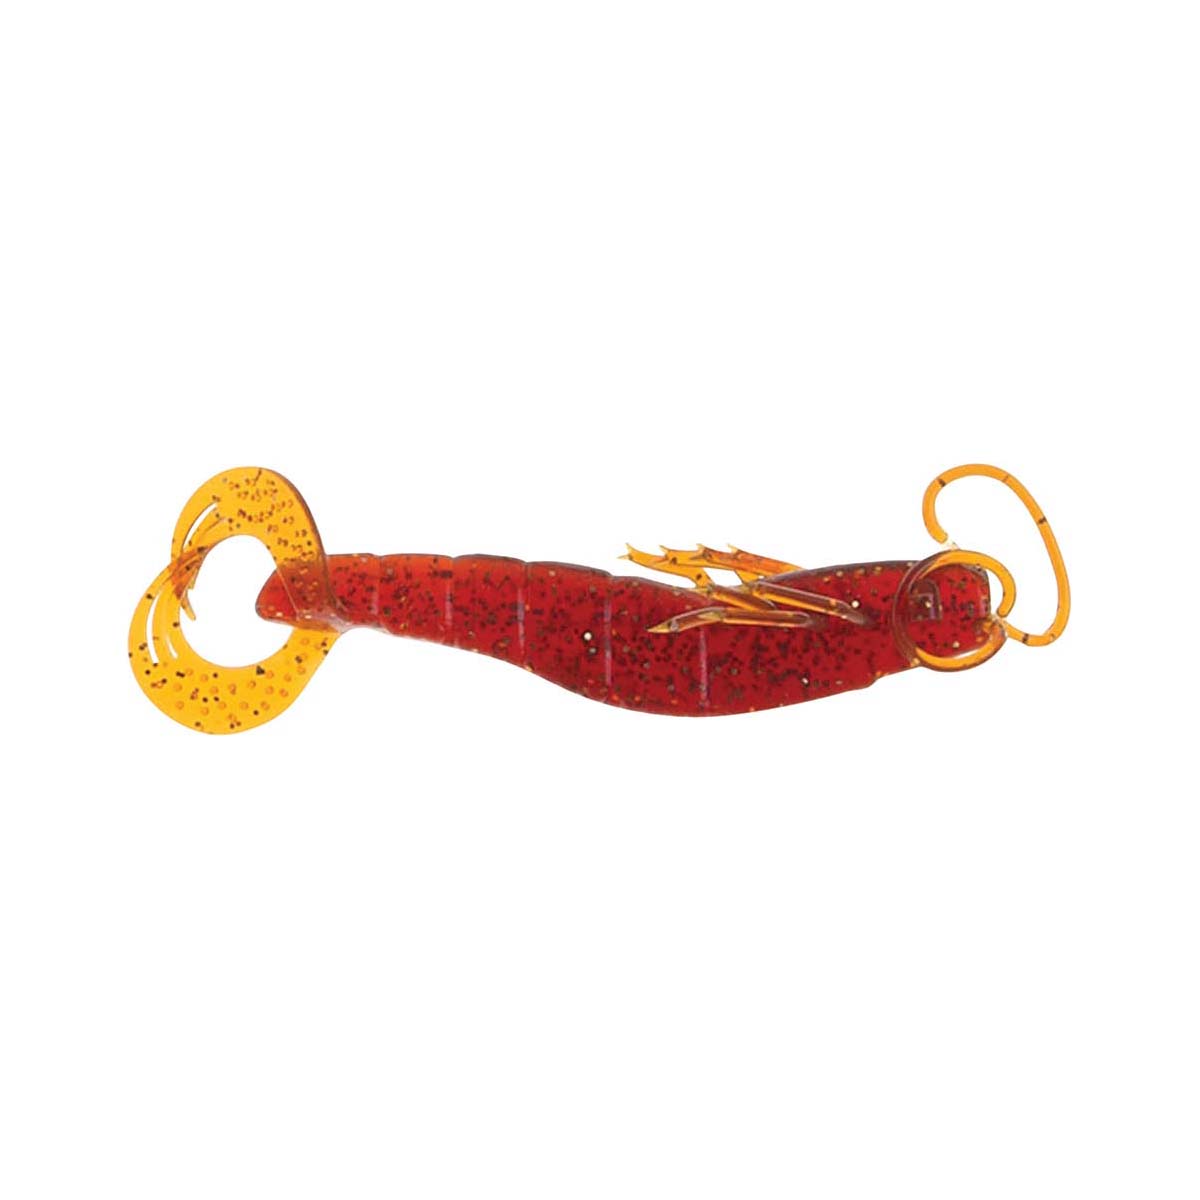 Atomic Plazos Prong Soft Plastic Lure 4in Motor Oil Gold